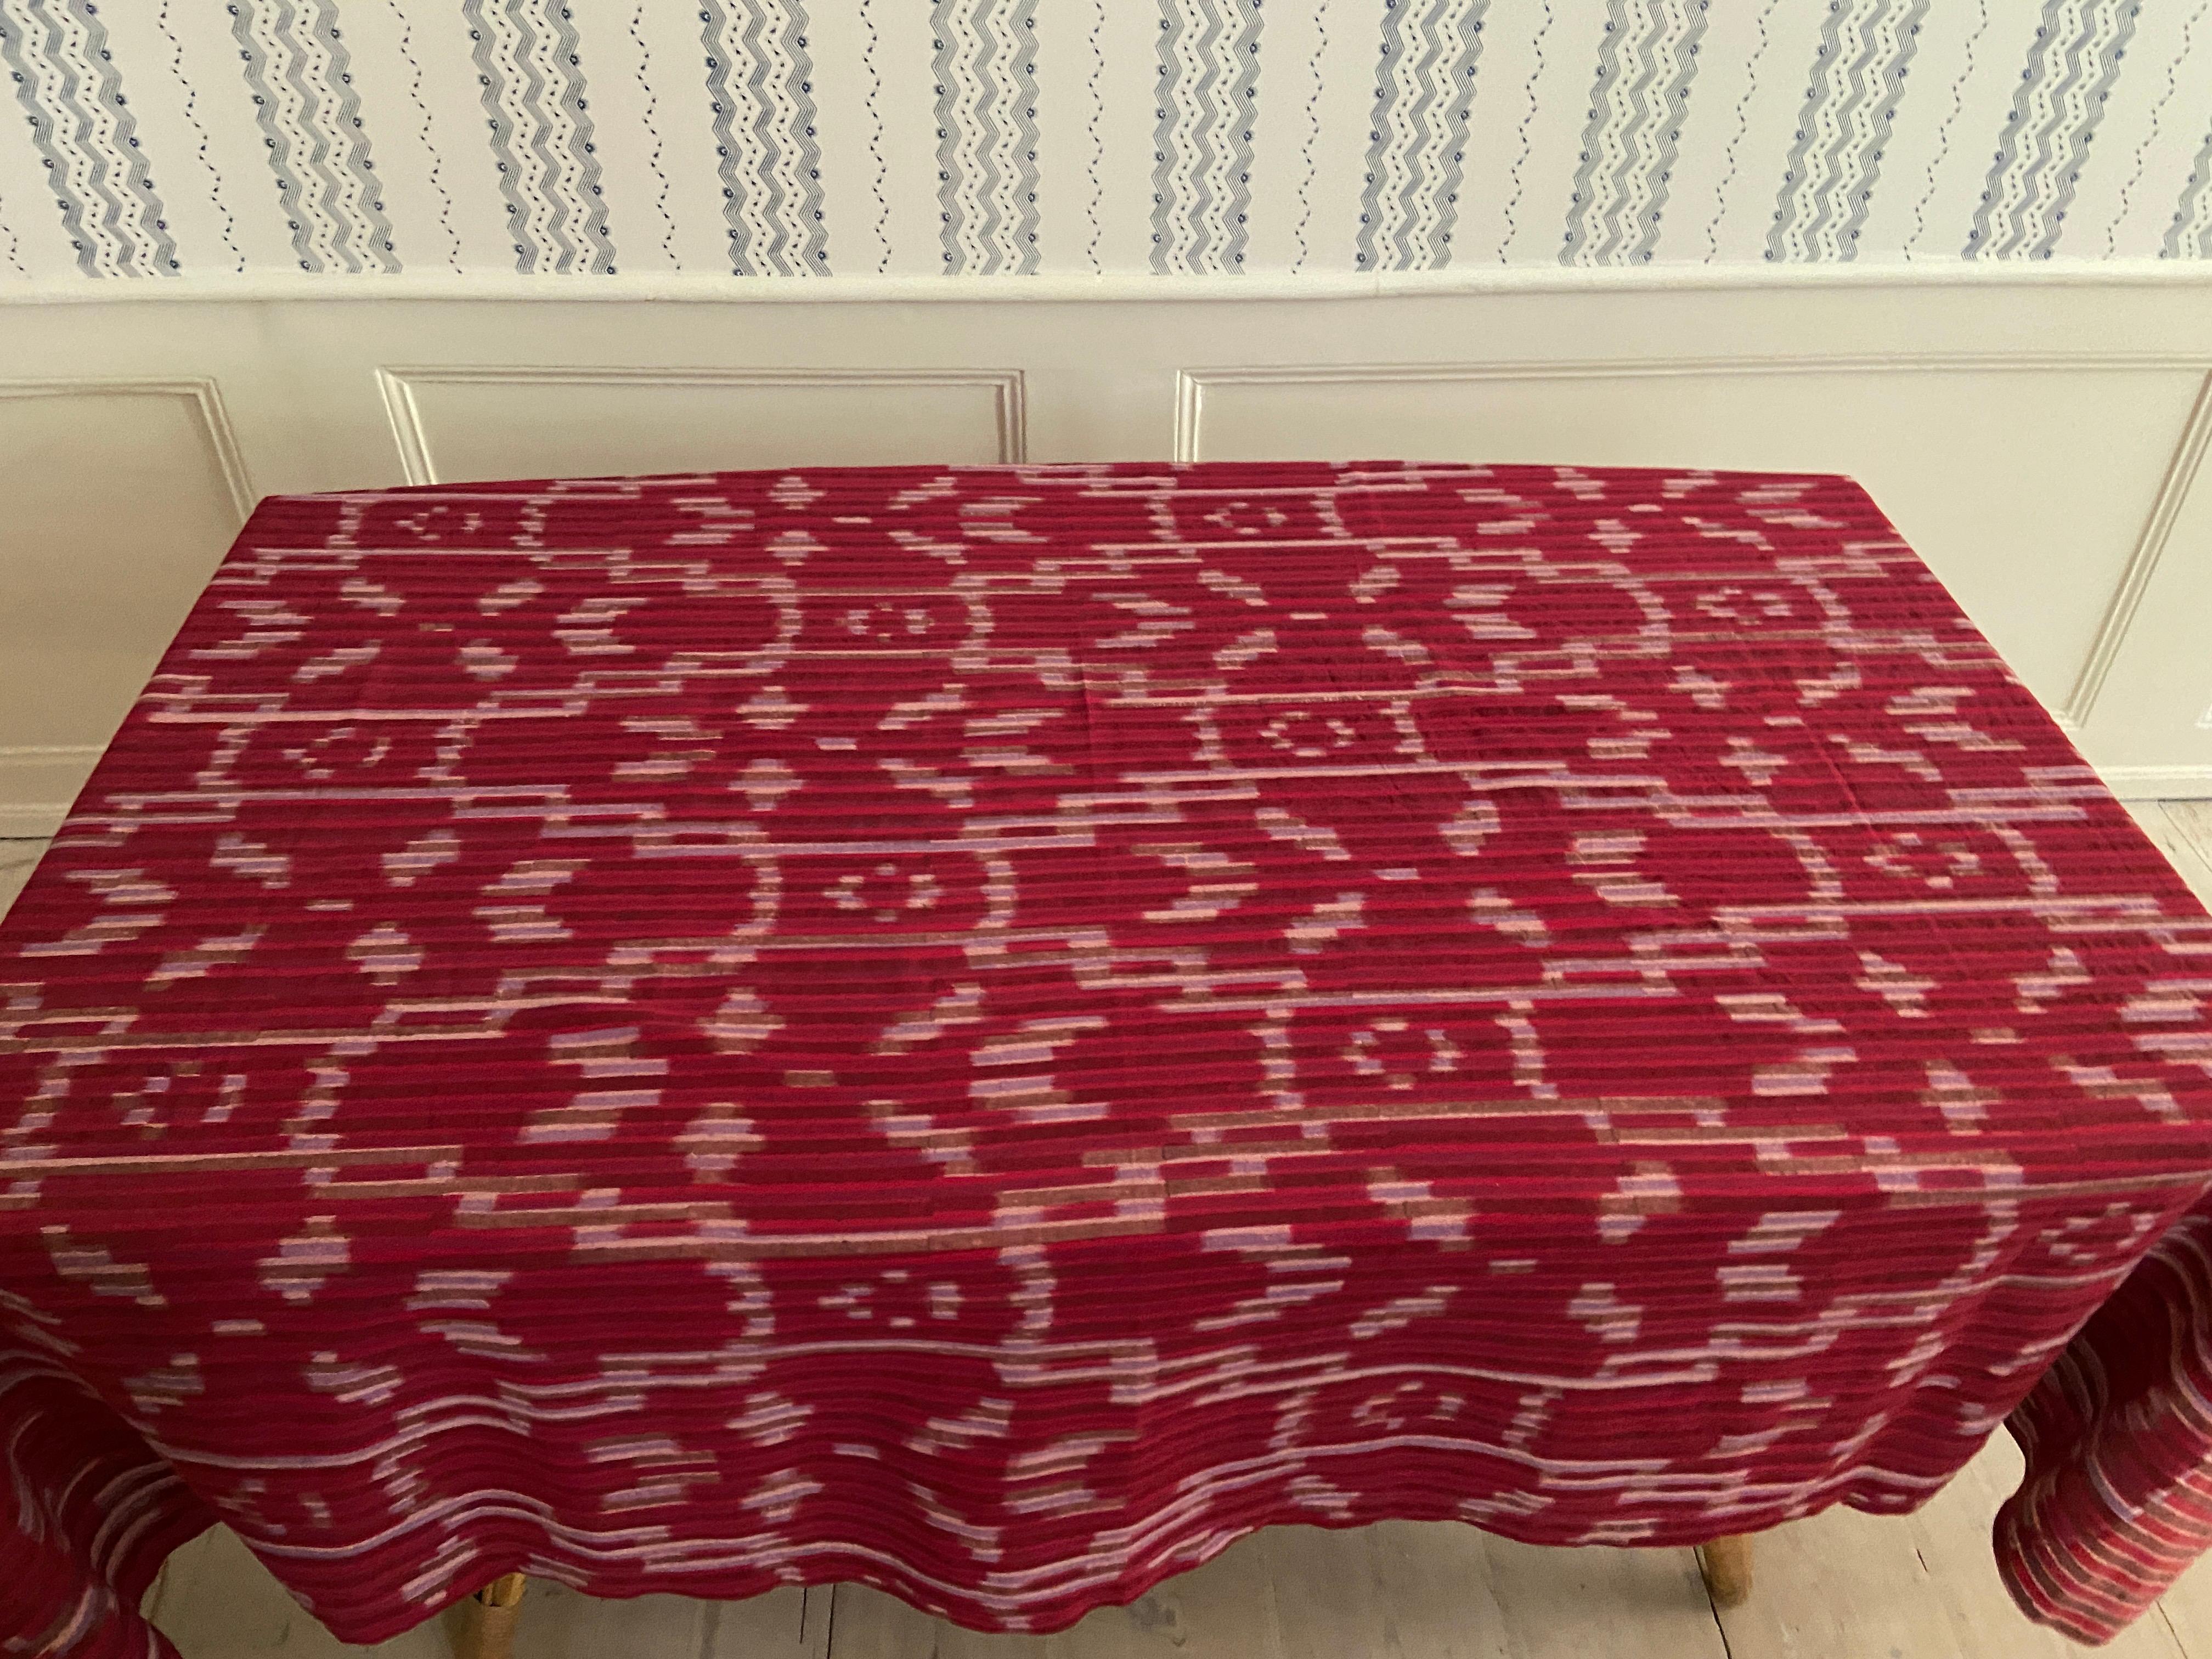 Textile Contemporary Gregory Parkinson Tablecloth Red Pink Ikat Hand-Blocked Patterns For Sale